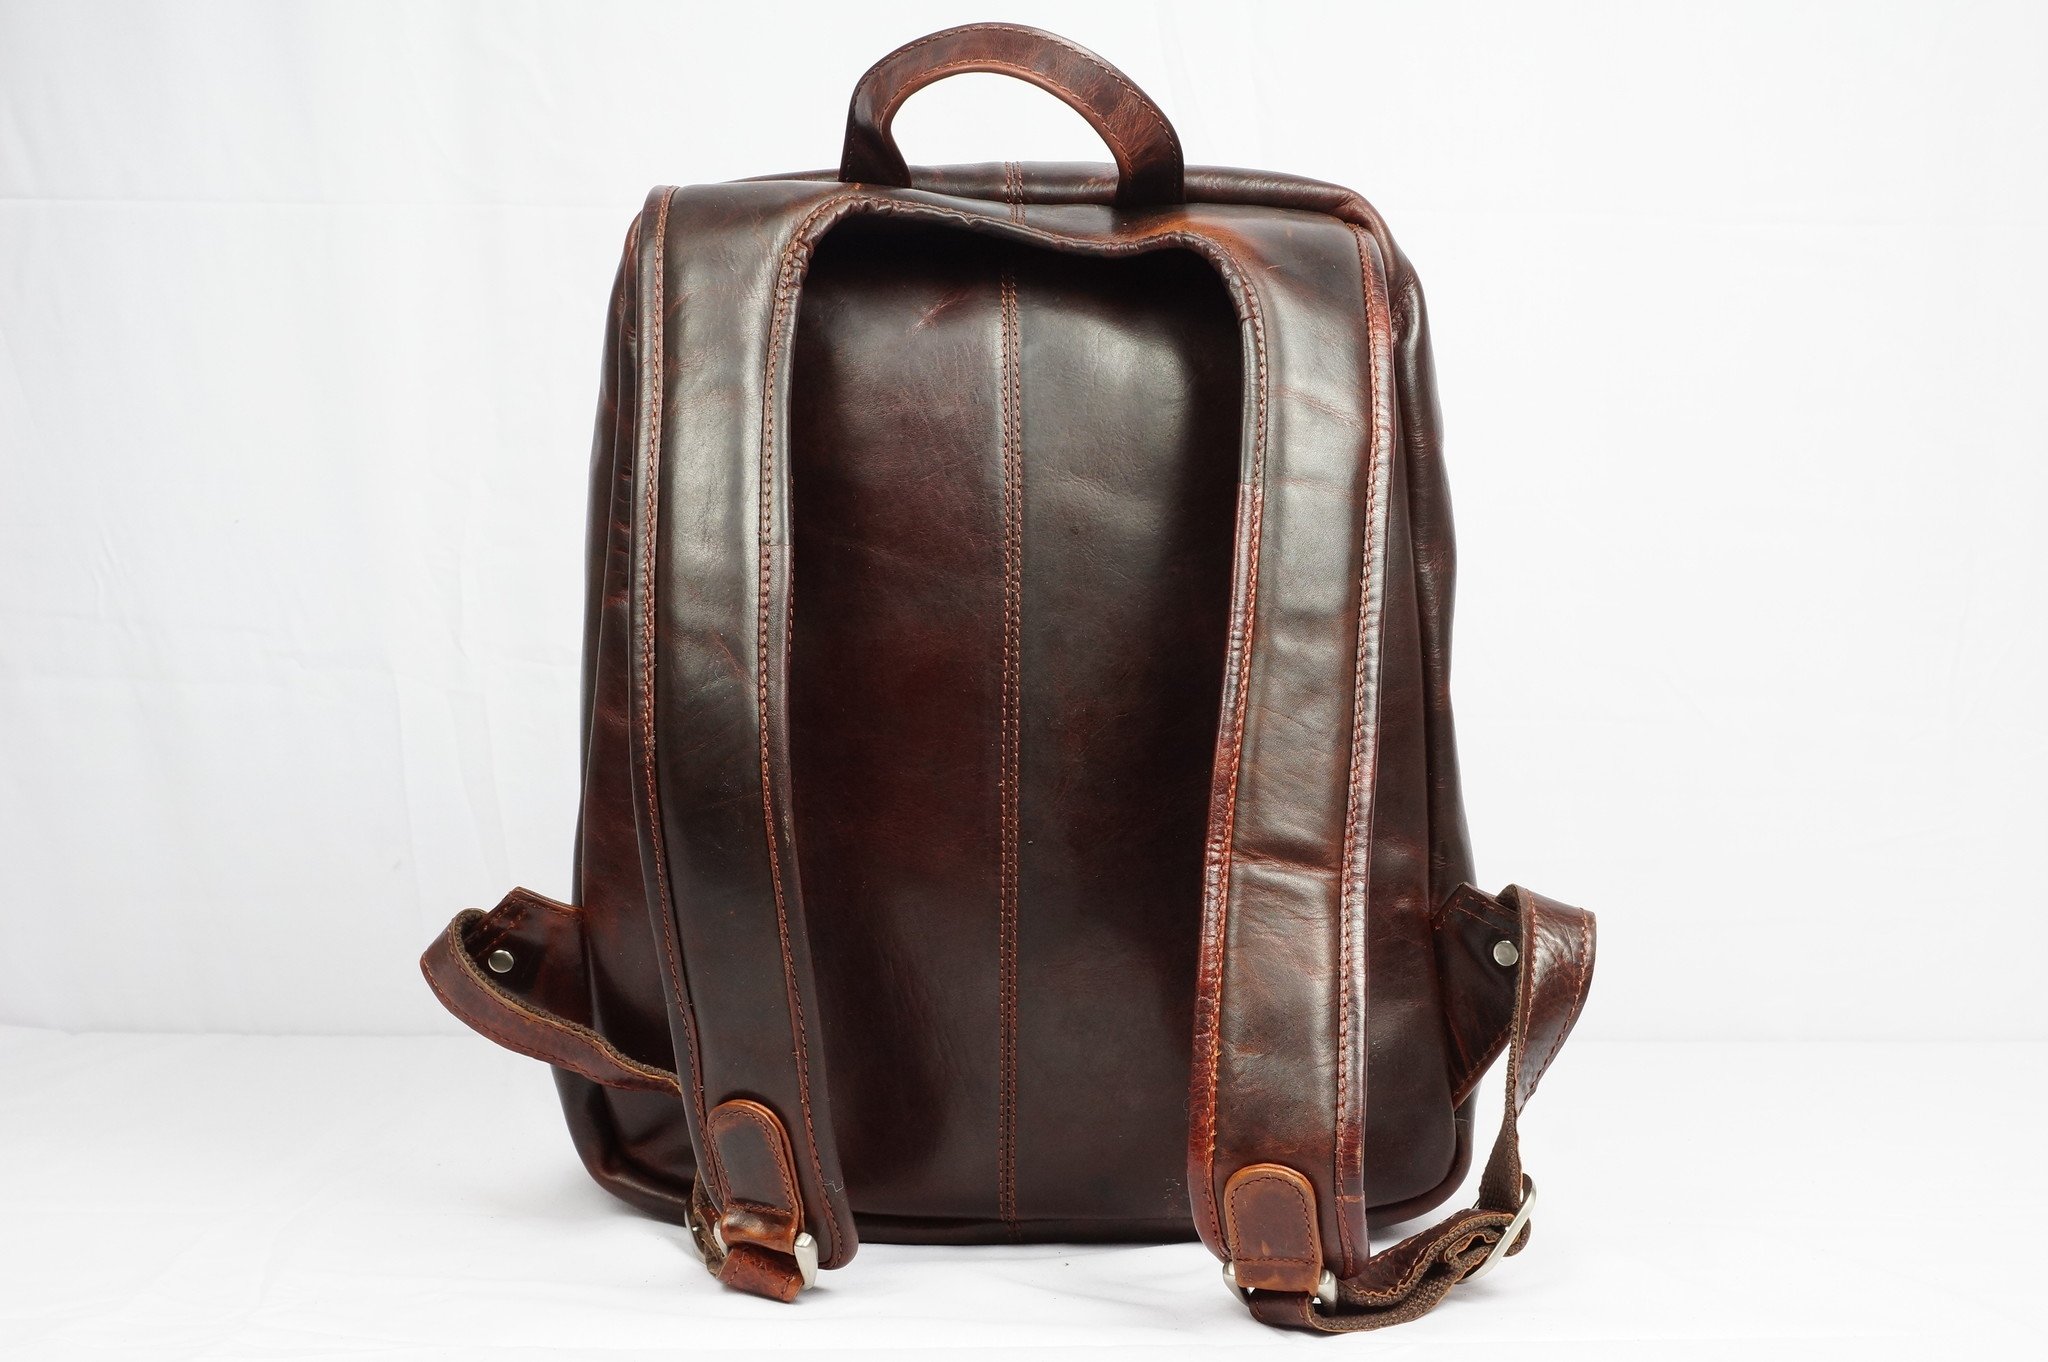 Arpello Old School back pack